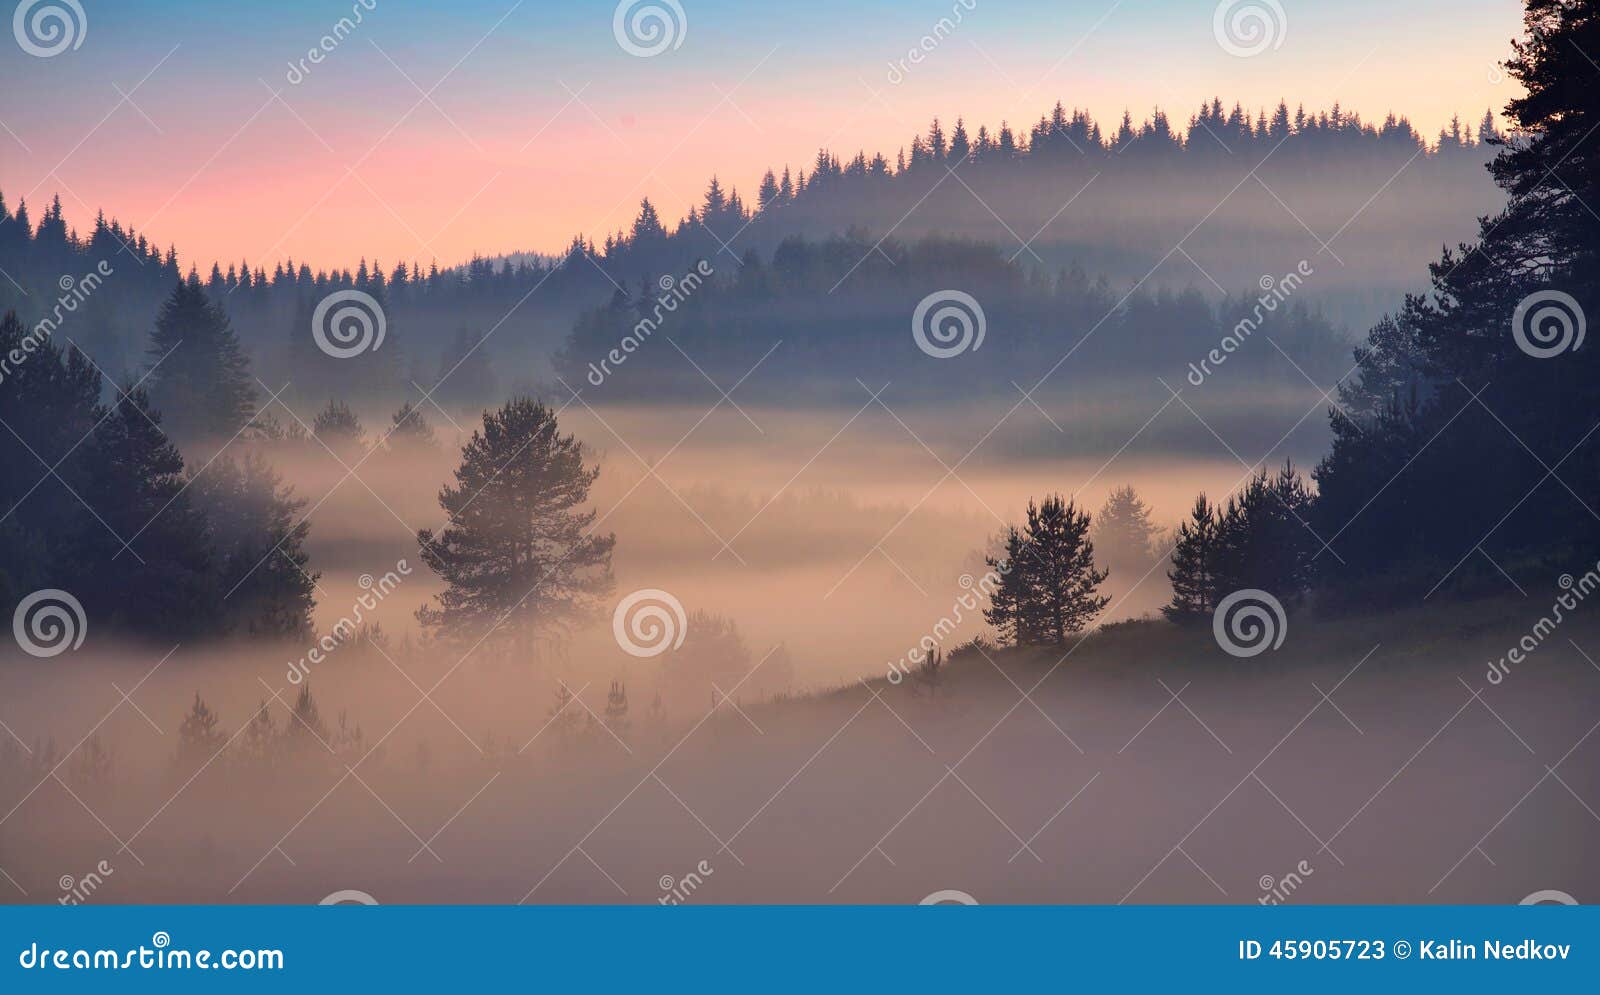 pine tree forest at sunrise